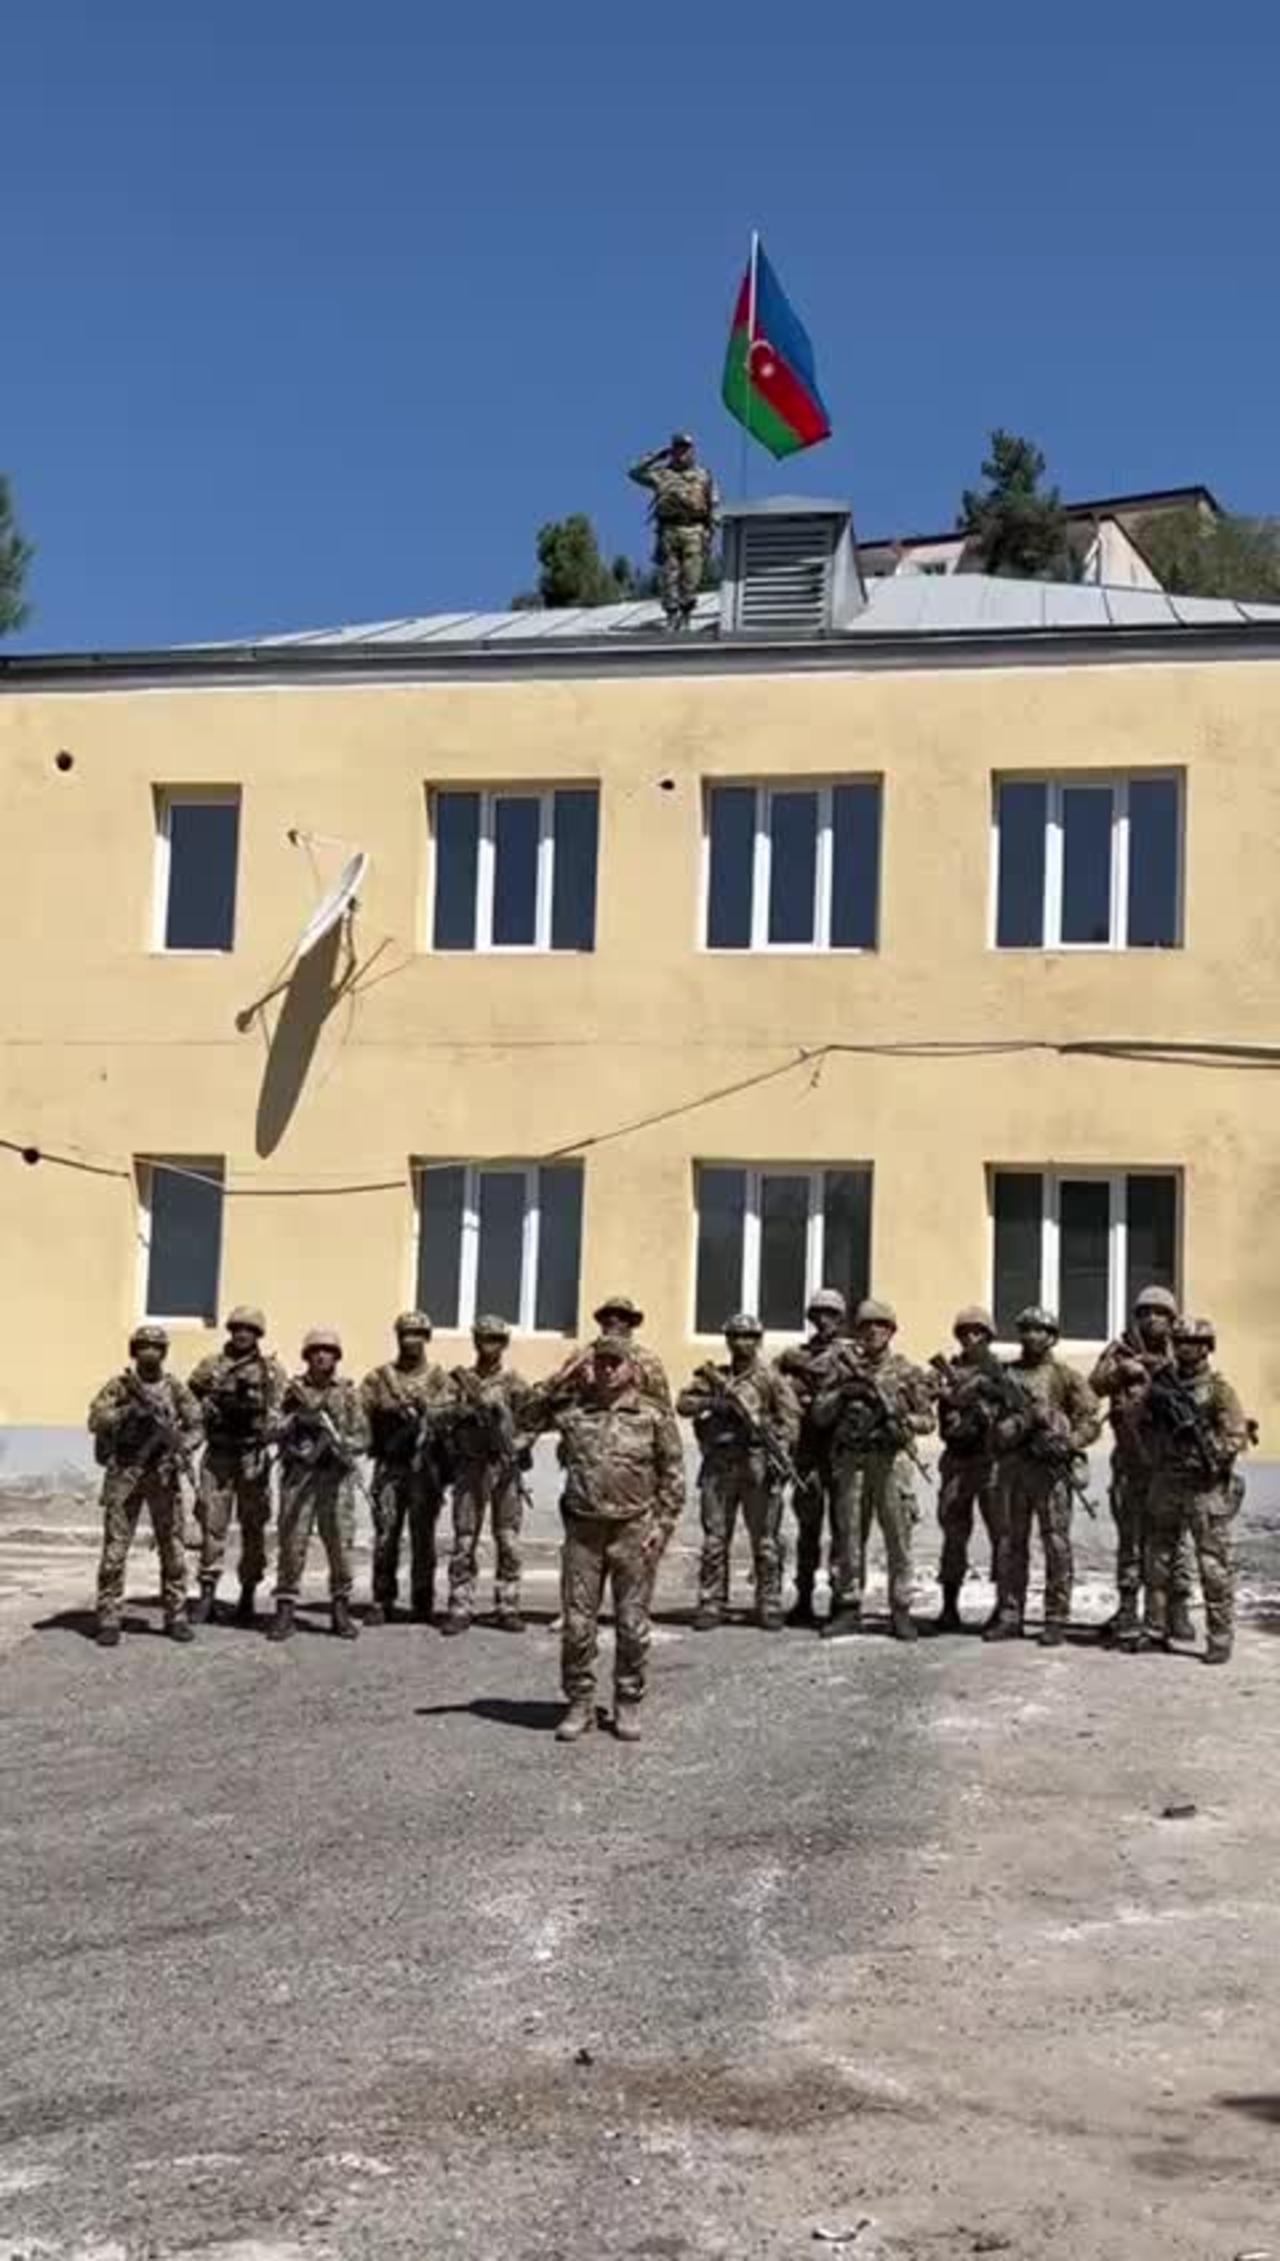 Azerbaijani forces have taken over the city of Lachin